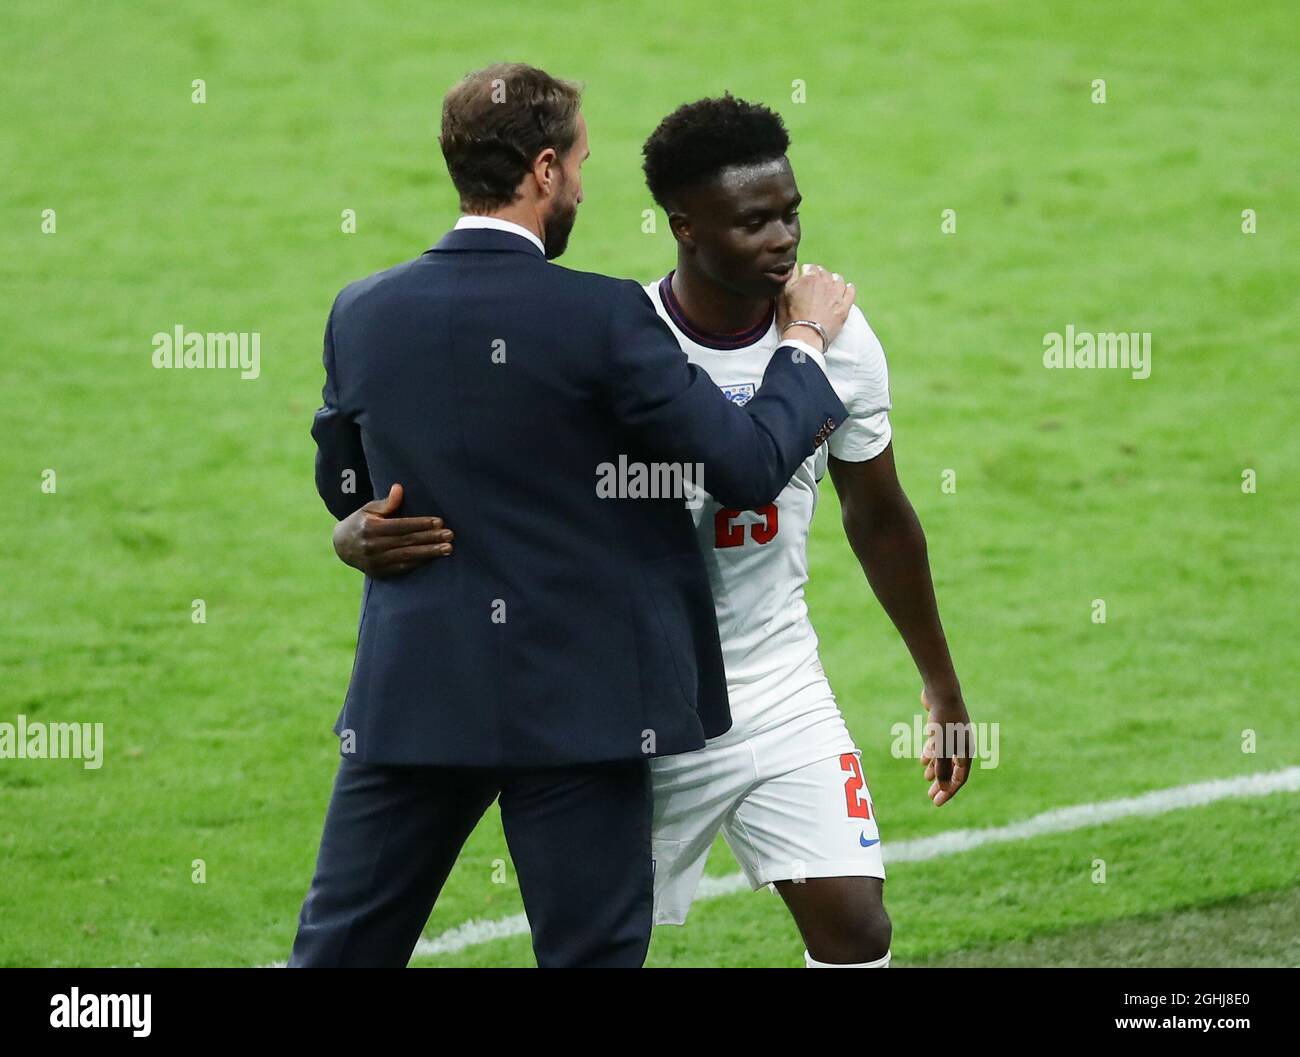 London, England, 22nd June 2021. Gareth Southgate manager of England substitutes Bukayo Sako of England during the UEFA European Championships match at Wembley Stadium, London. Picture credit should read: David Klein / Sportimage via PA Images Stock Photo